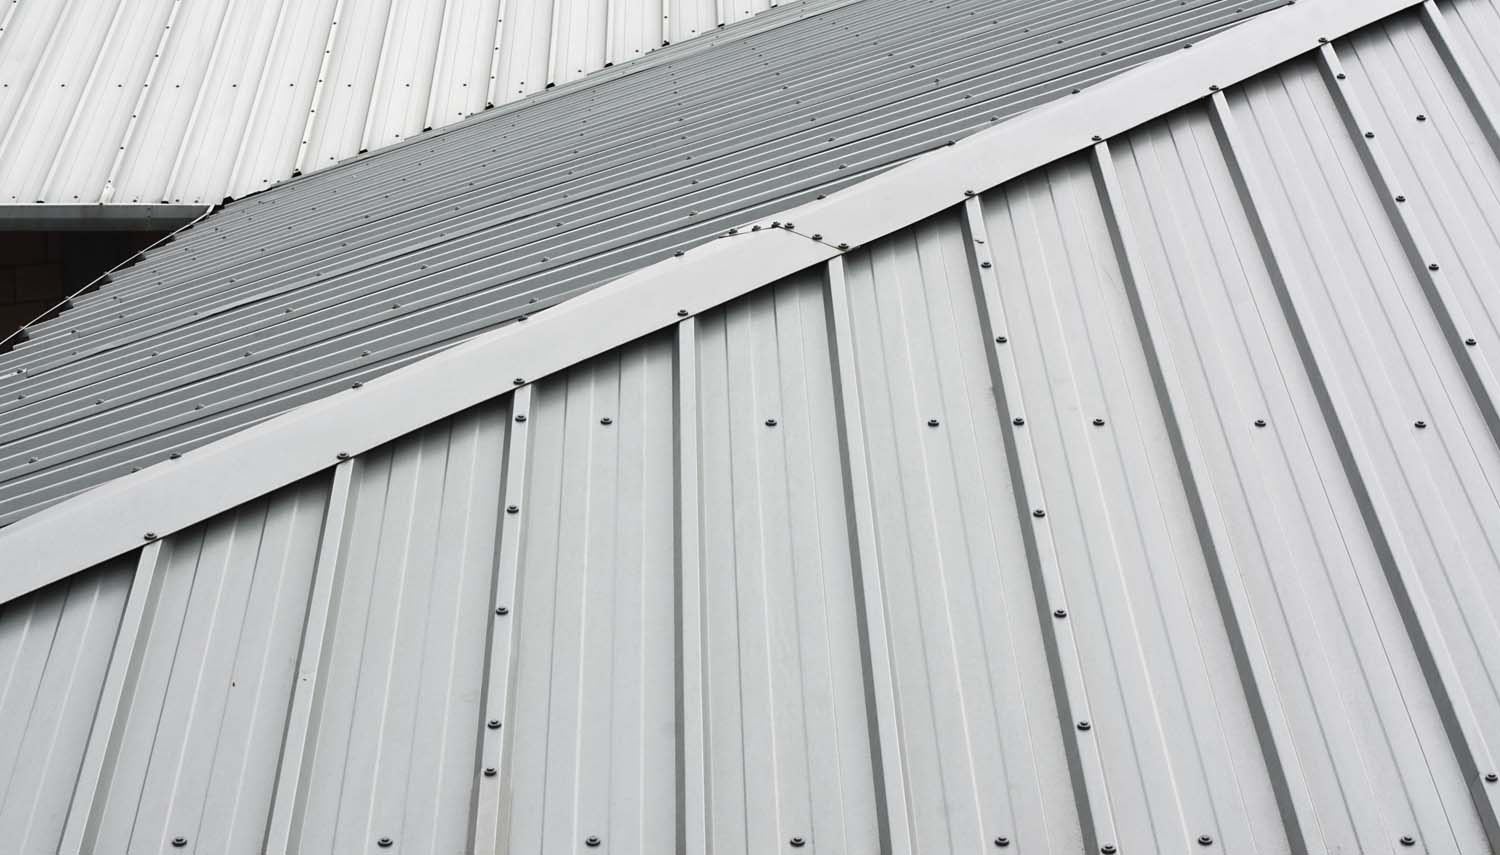 close view of metal roof showing the detail  of the construction